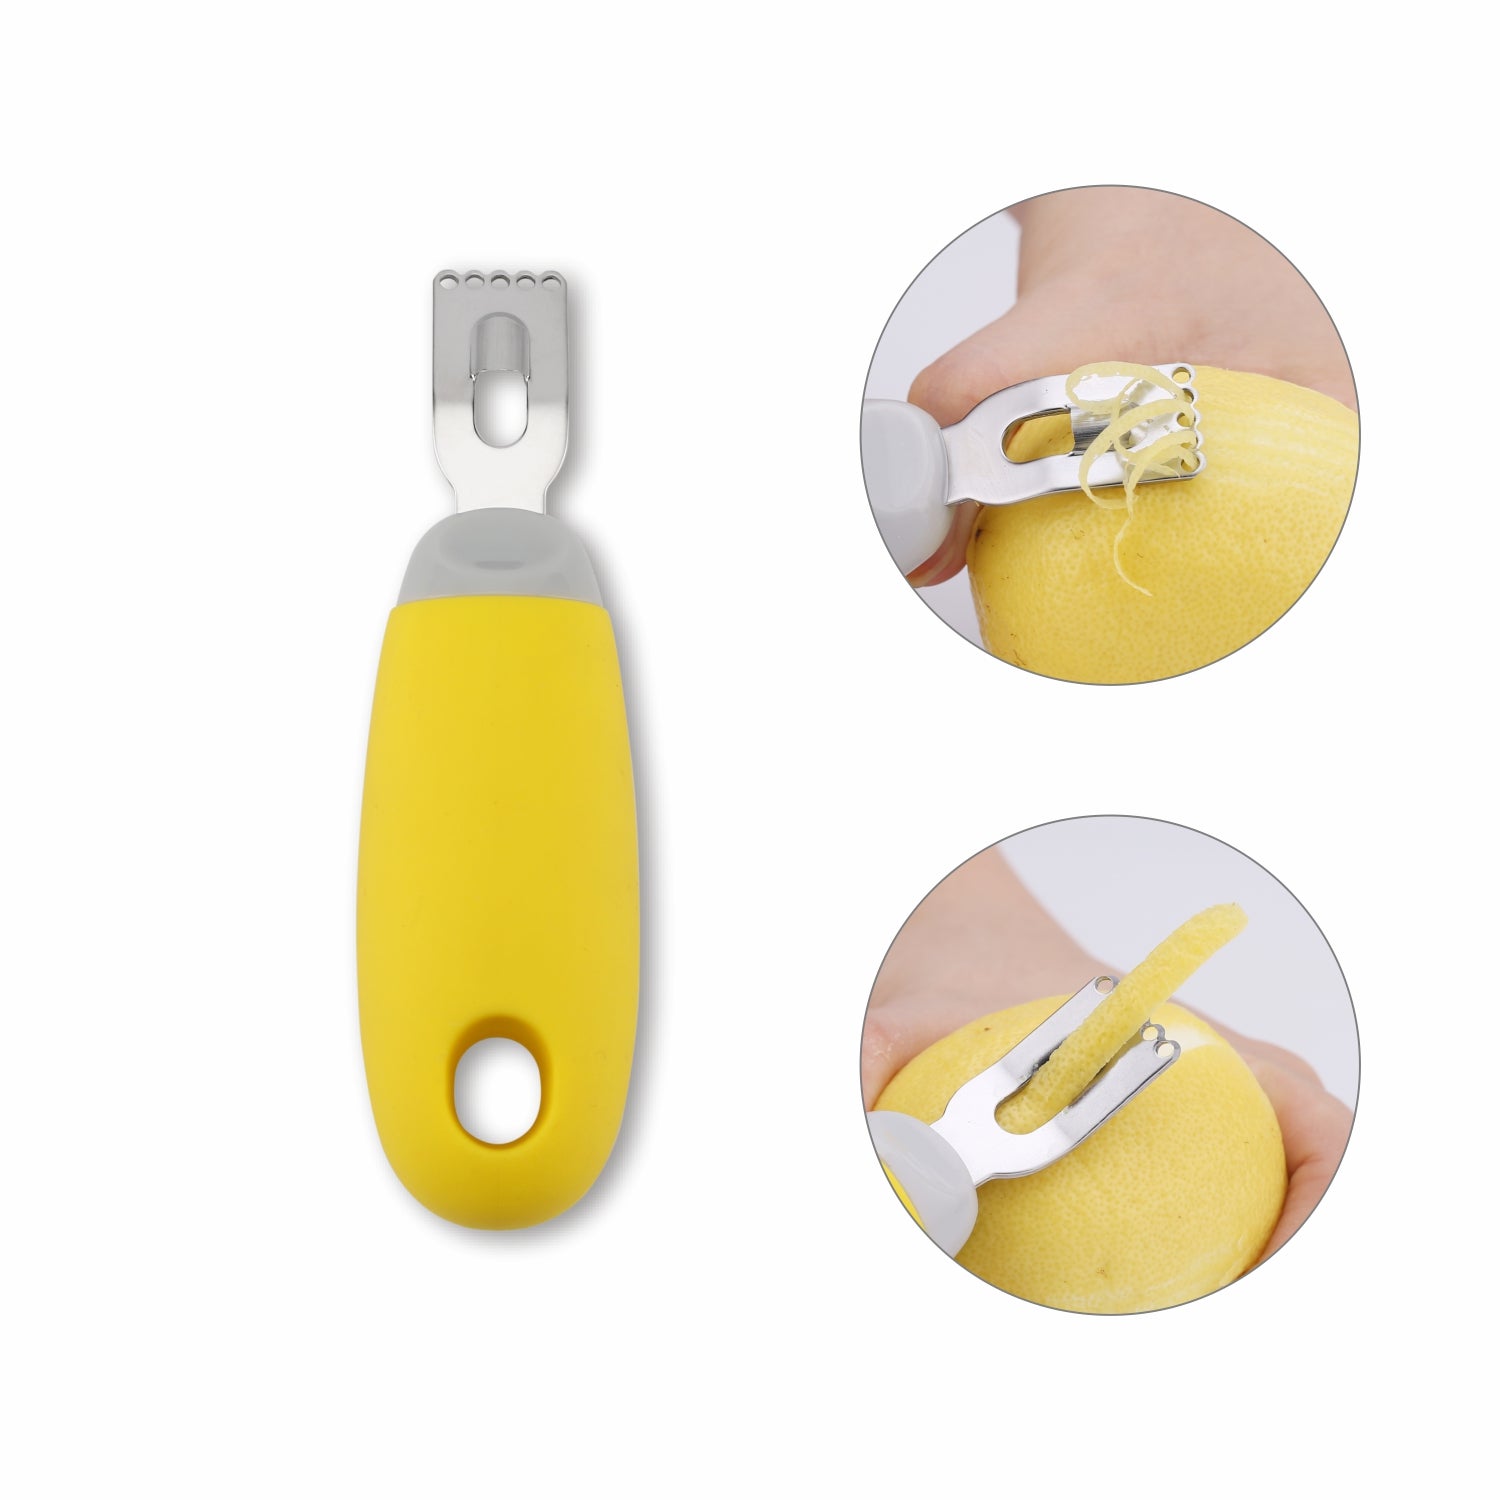 Citrus Zester and Channel Knife, Pastry tool